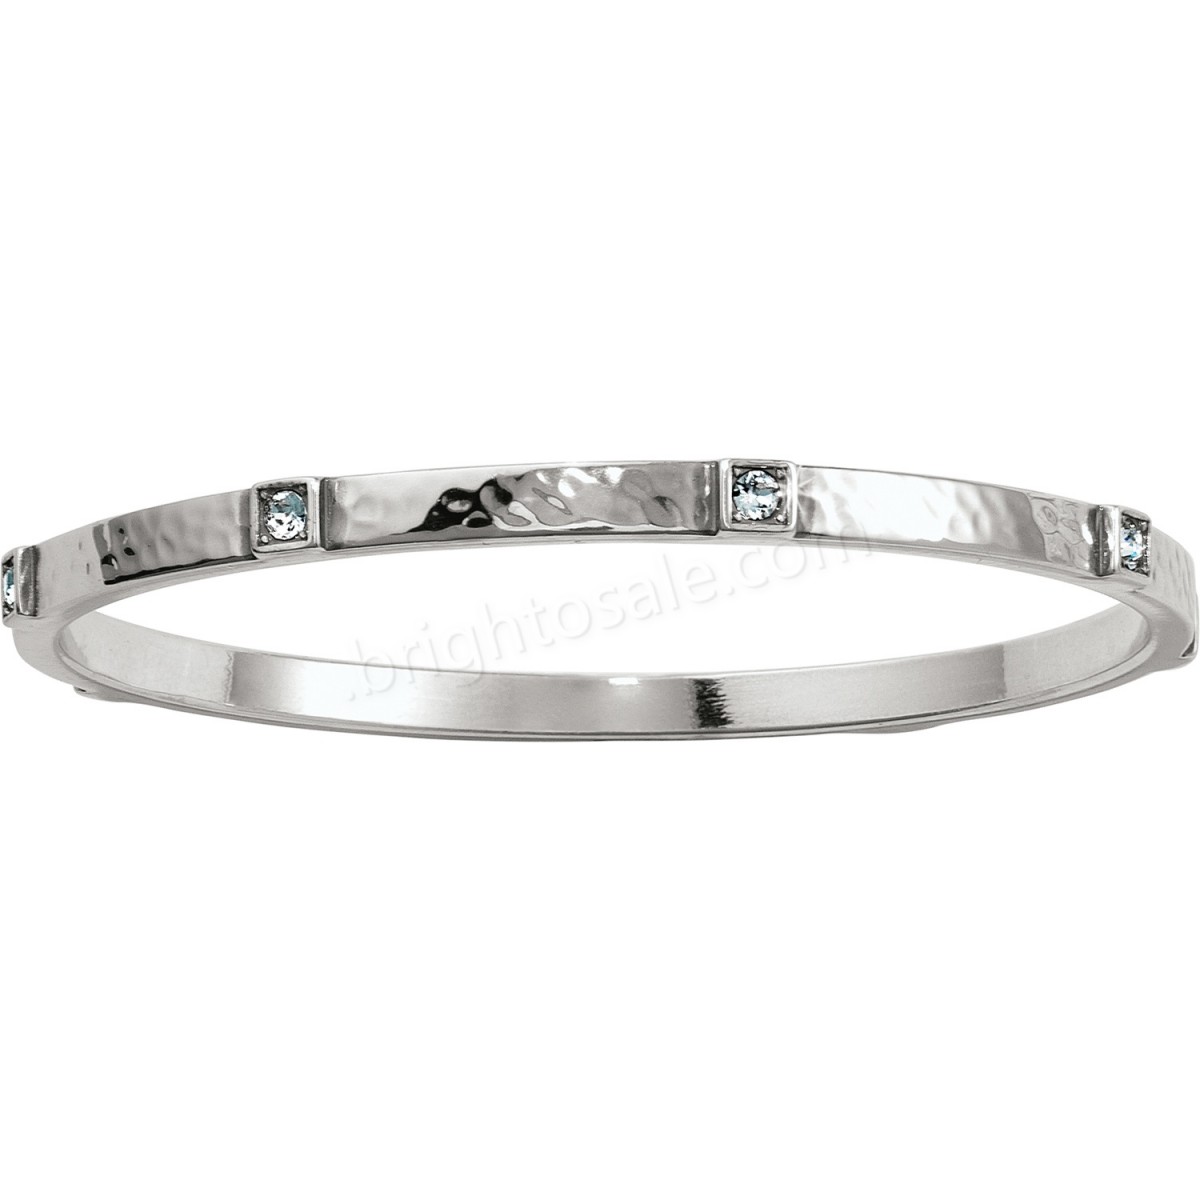 Brighton Collectibles & Online Discount Meridian Zenith Station Bangle - -3